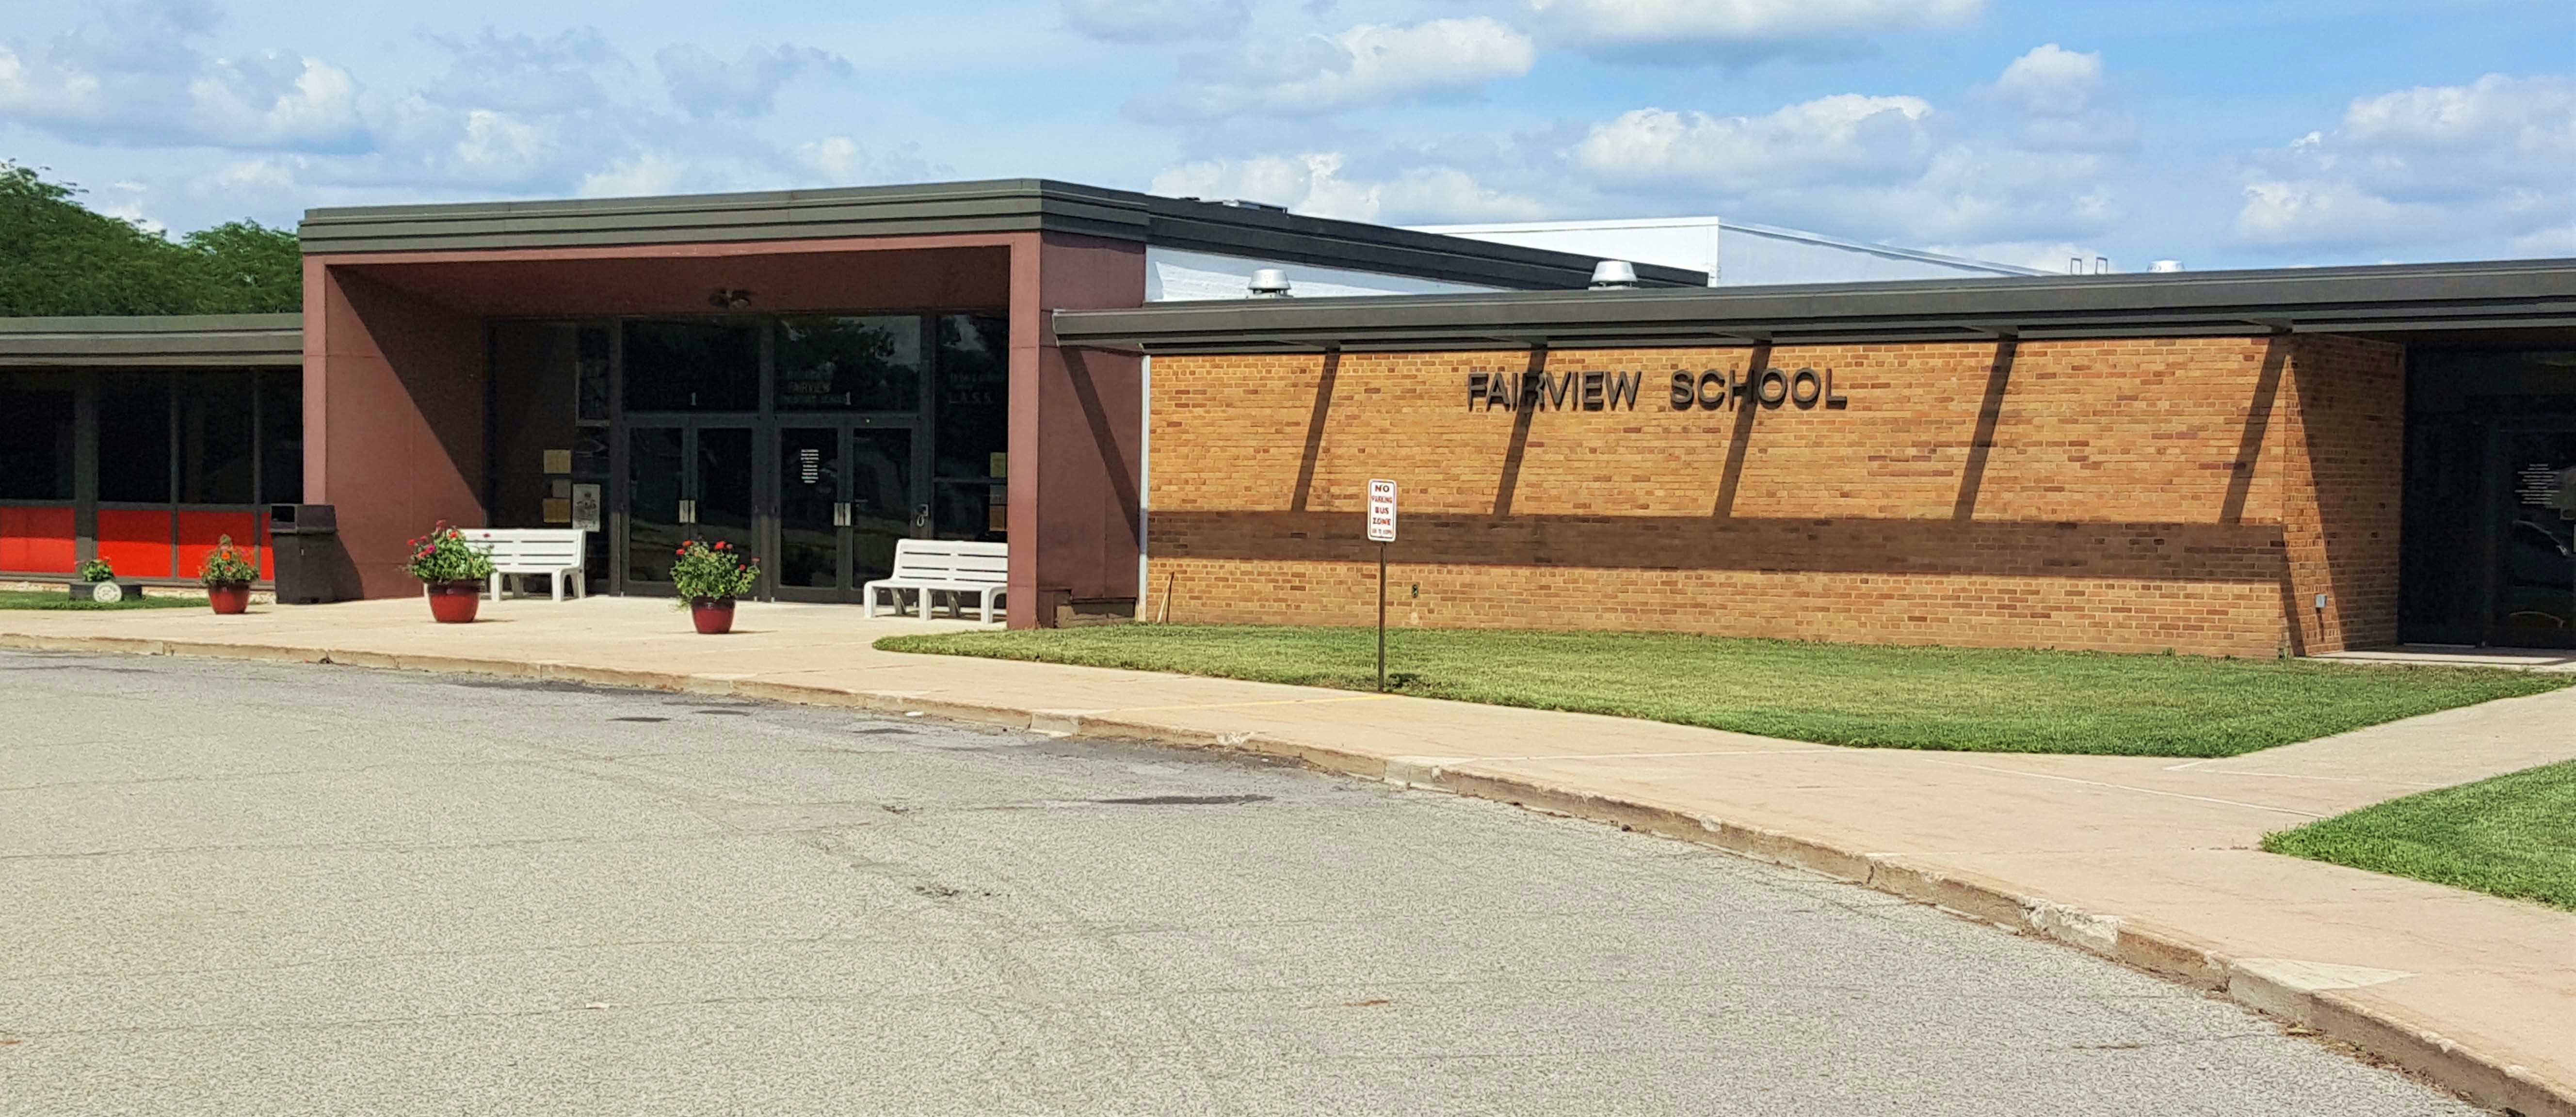 Exterior view of Fairview Elementary